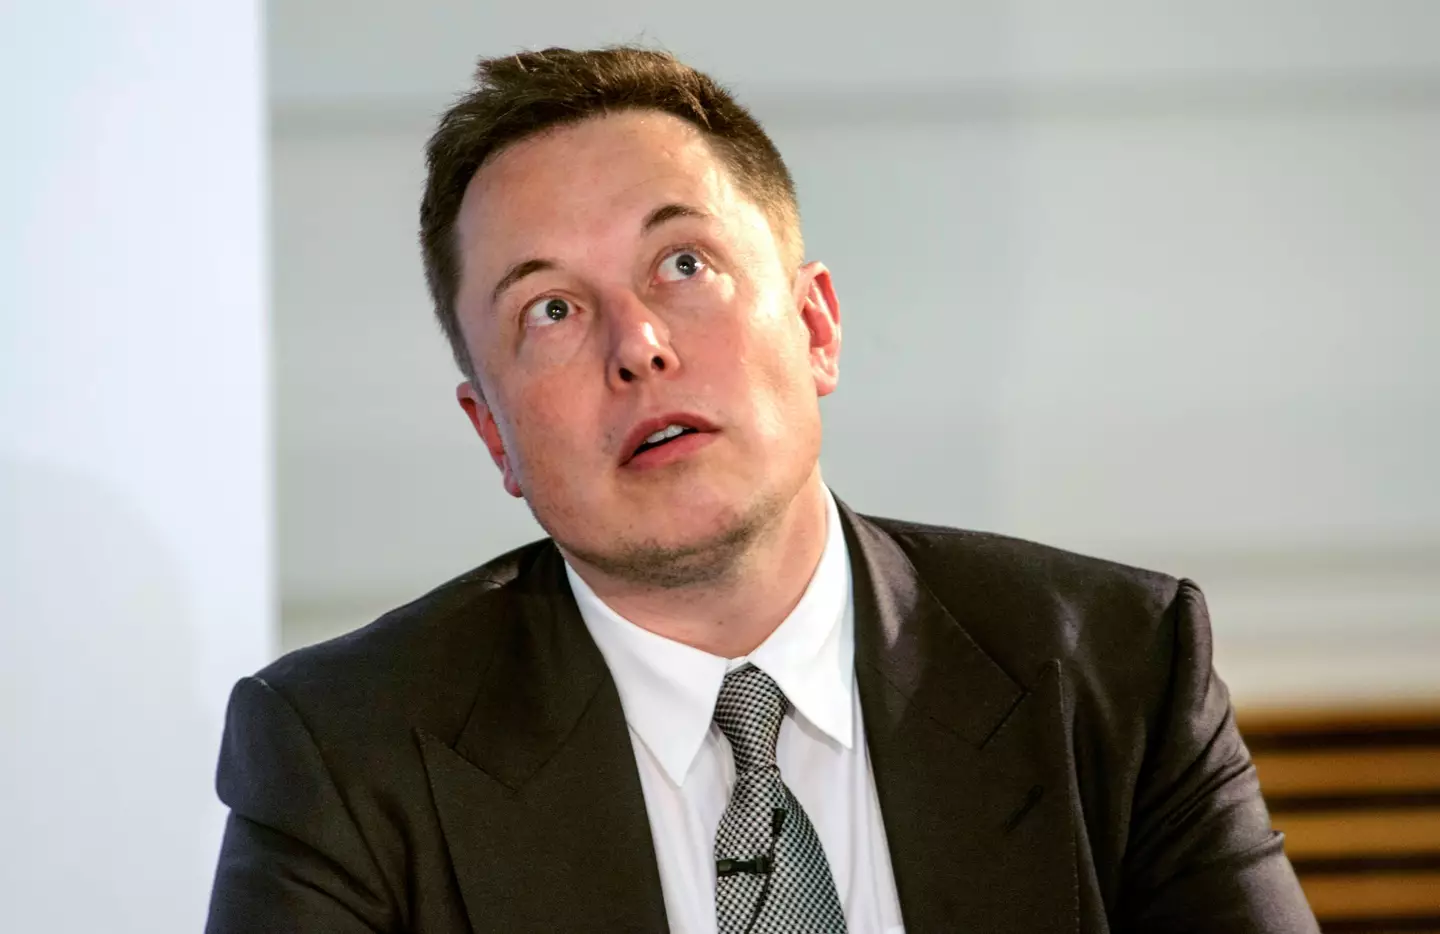 Elon Musk bought a $1 million car after selling his first company.